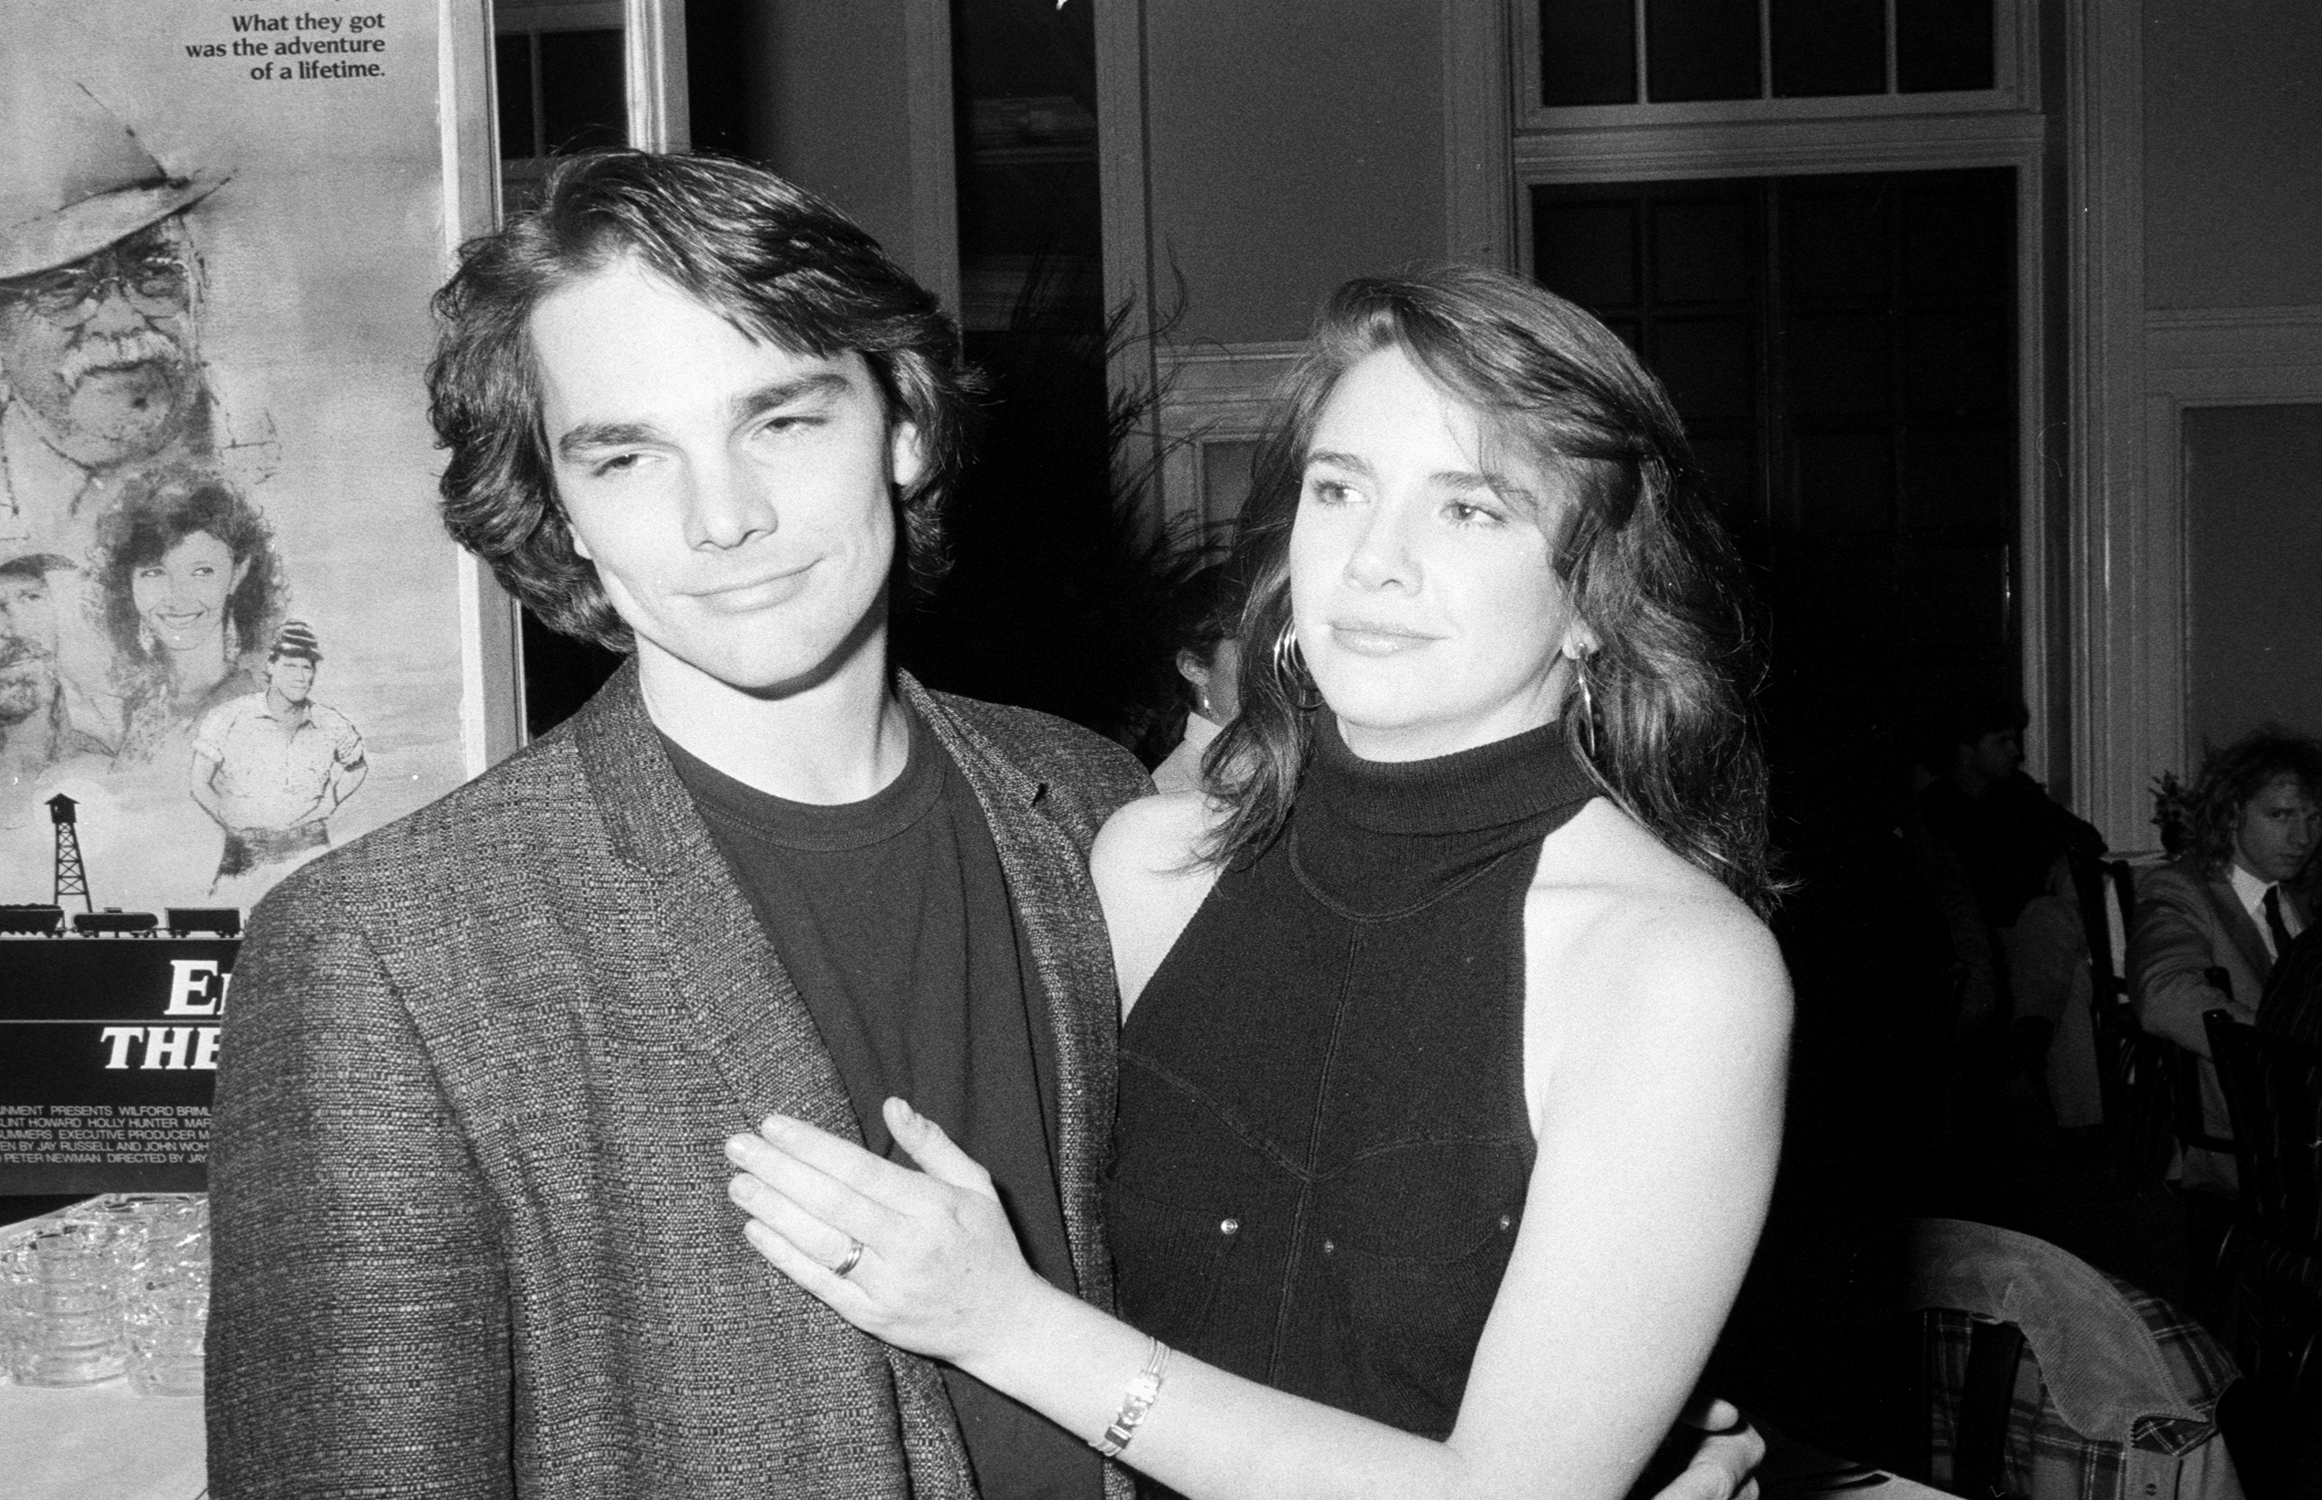 Melissa Gilbert and Bo Brinkman in black and white. Brinkman has his arm around Gilbert, Gilbert has her hand on his chest.